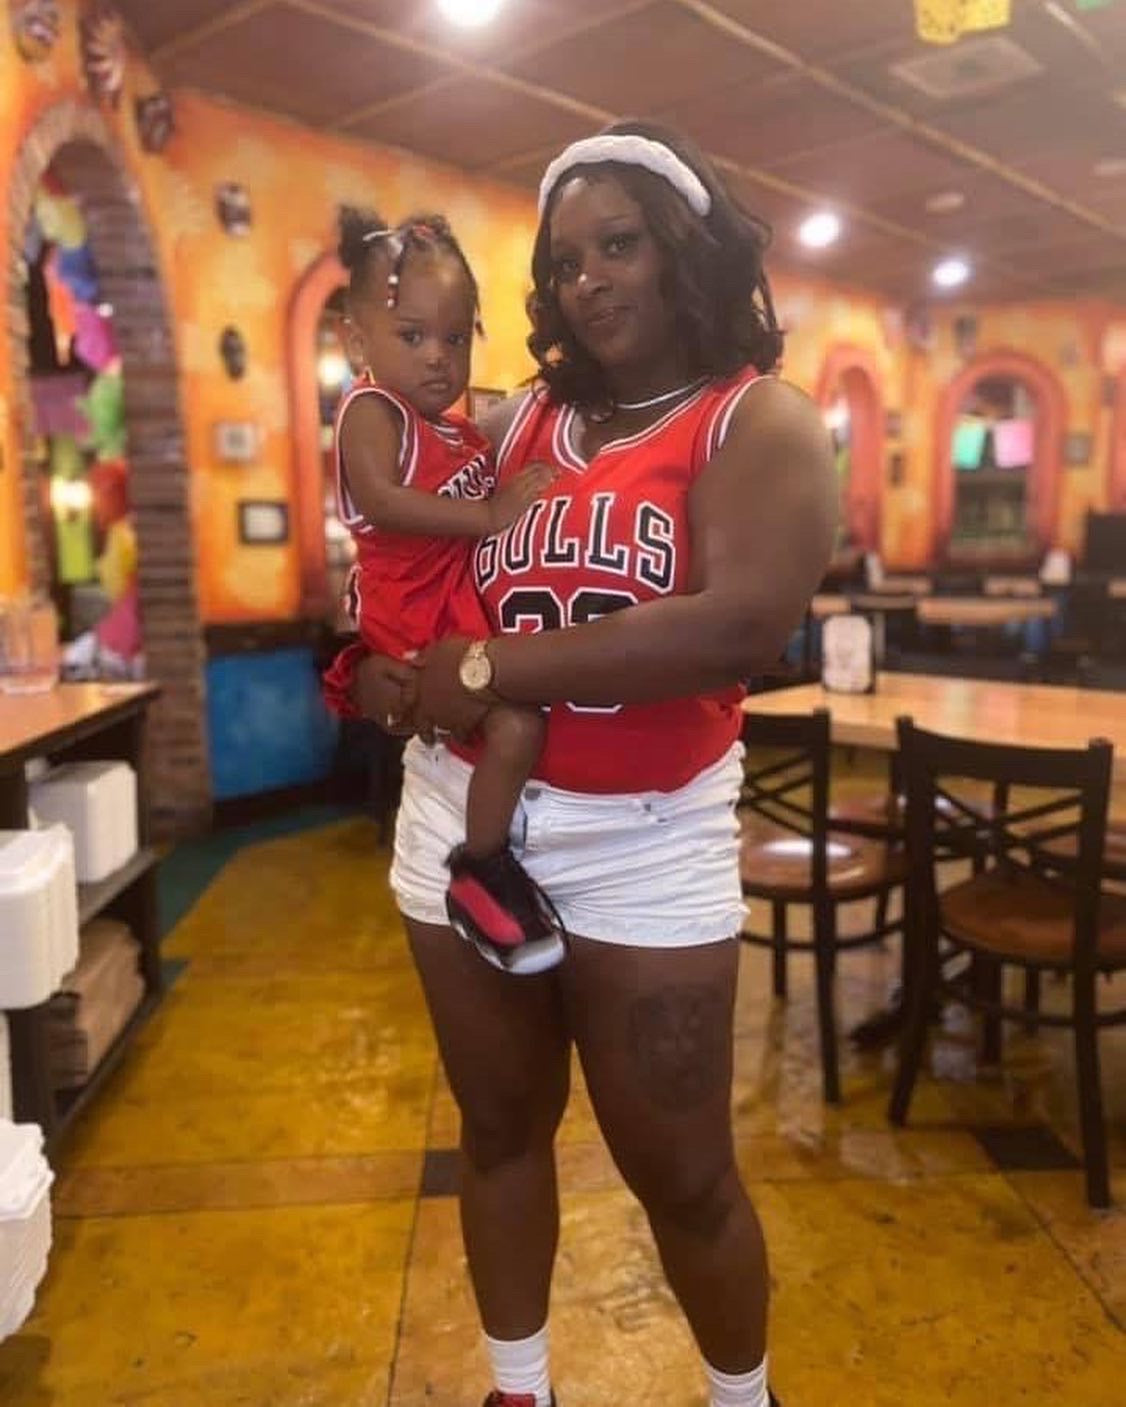 Bulls 23 Red Jersey MINI AND MOM